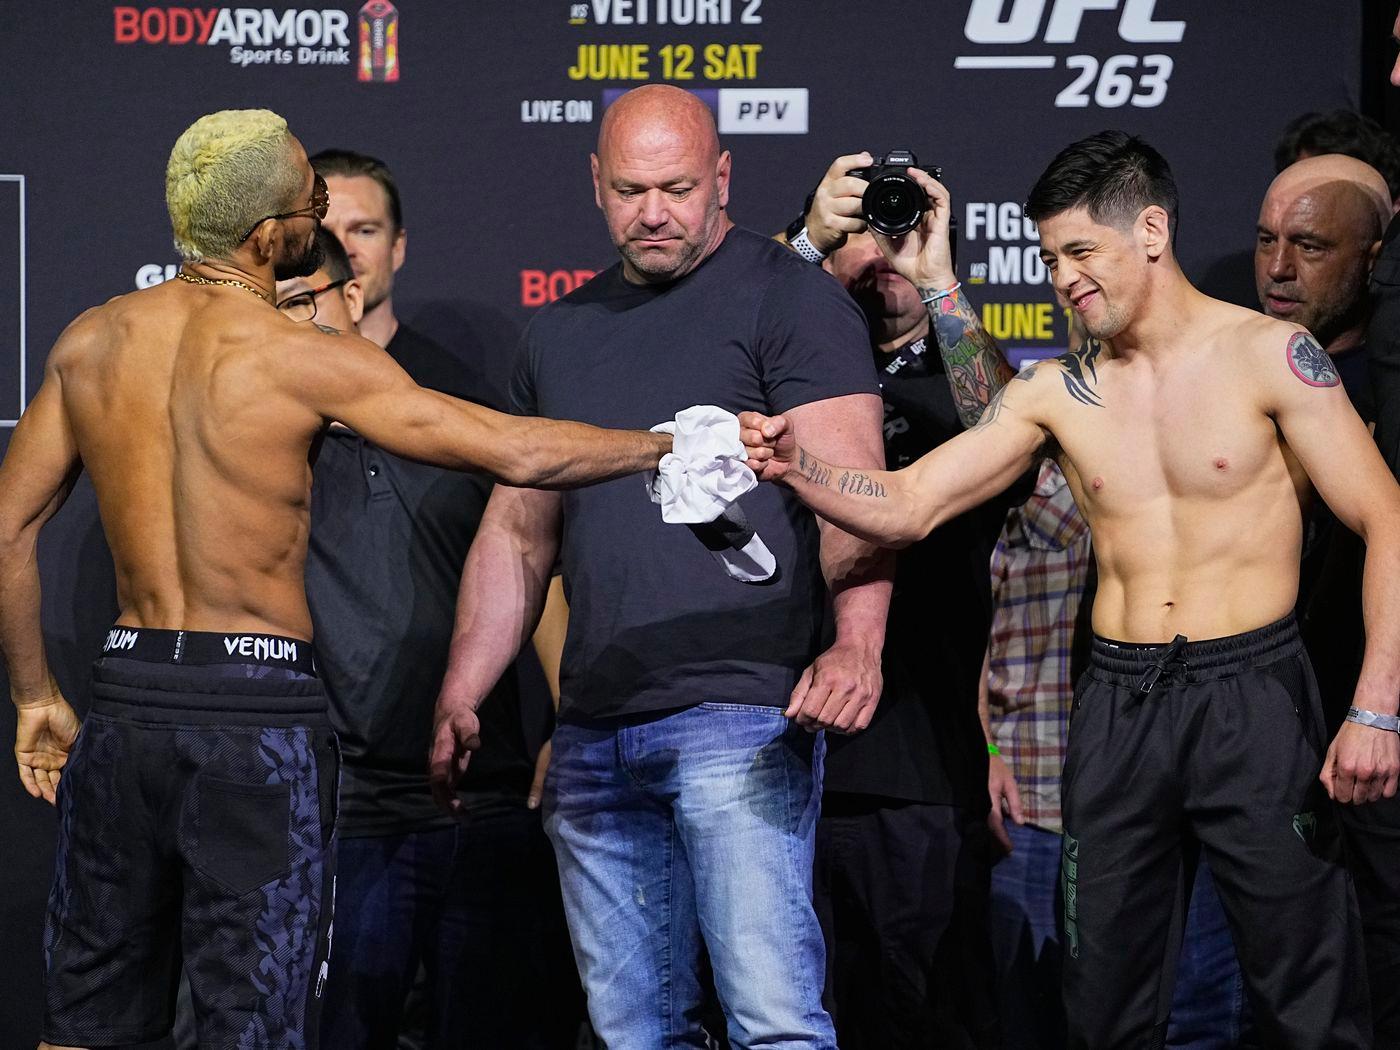 A show of respect between Brandon Moreno and Deiveson Figueiredo at UFC 263. Credit to: Bloody Elbow.